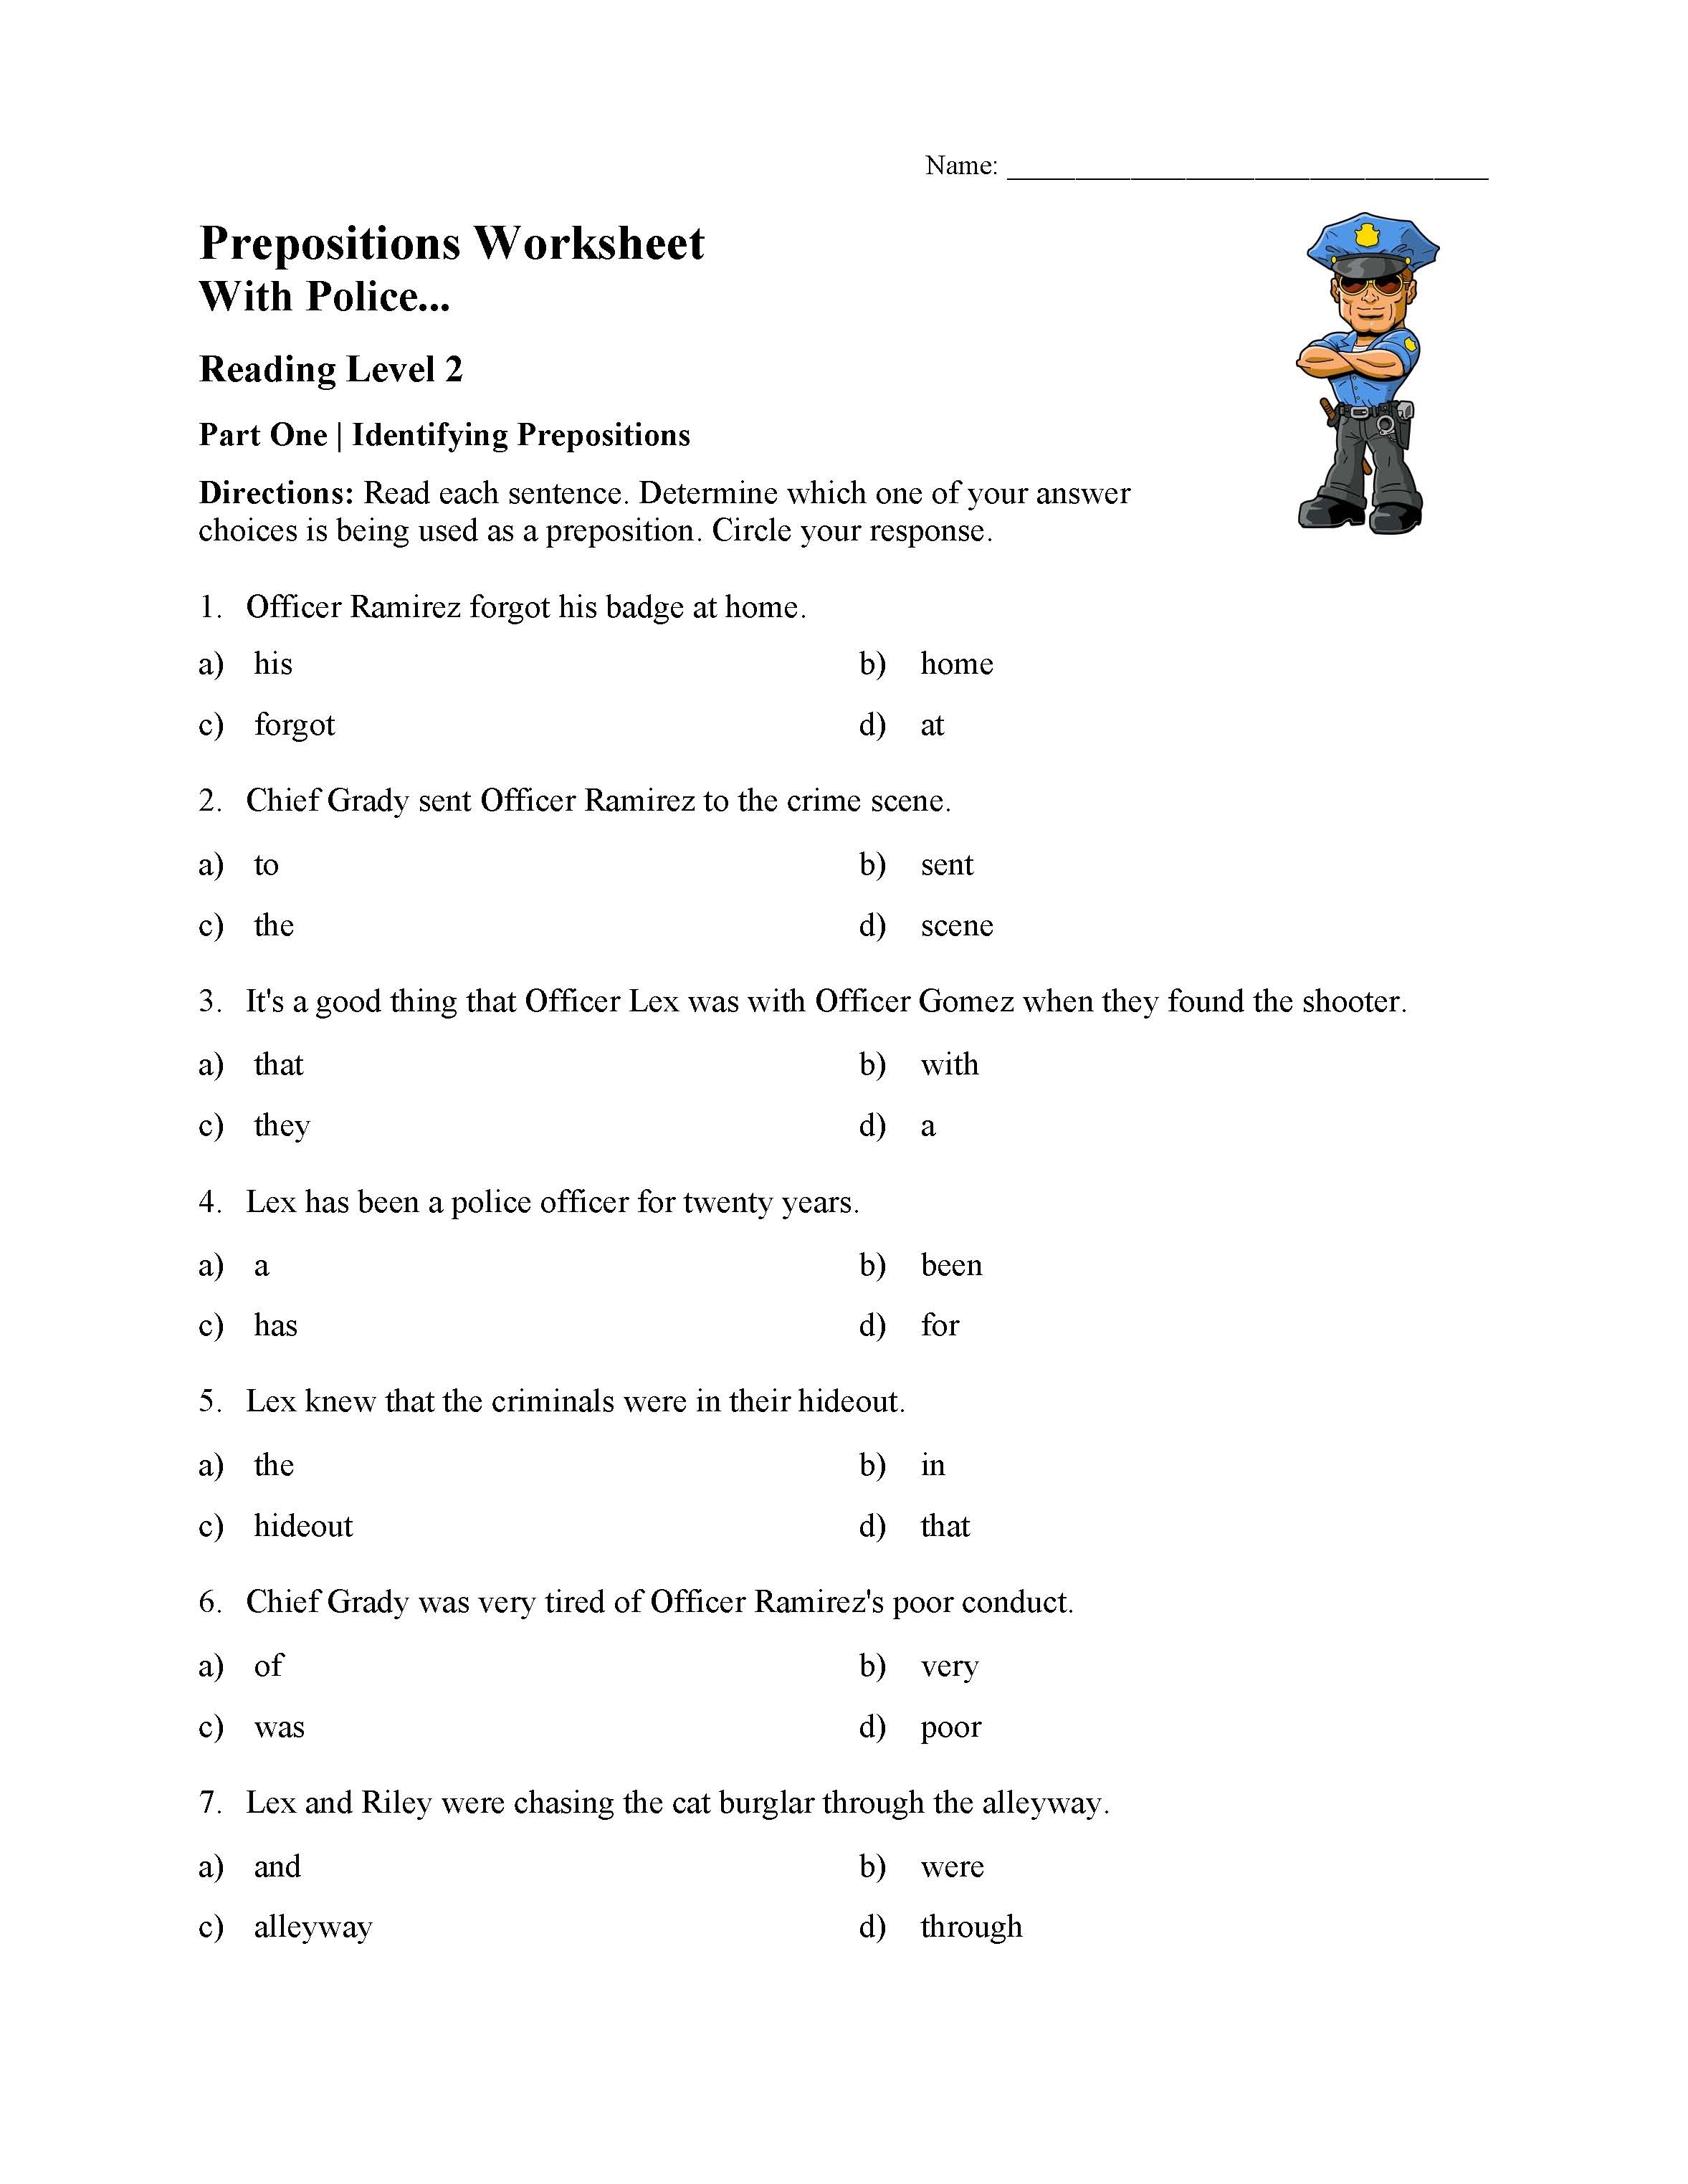 This is a preview image of Preposition Worksheet | With the Police. Click on it to enlarge it or view the source file.